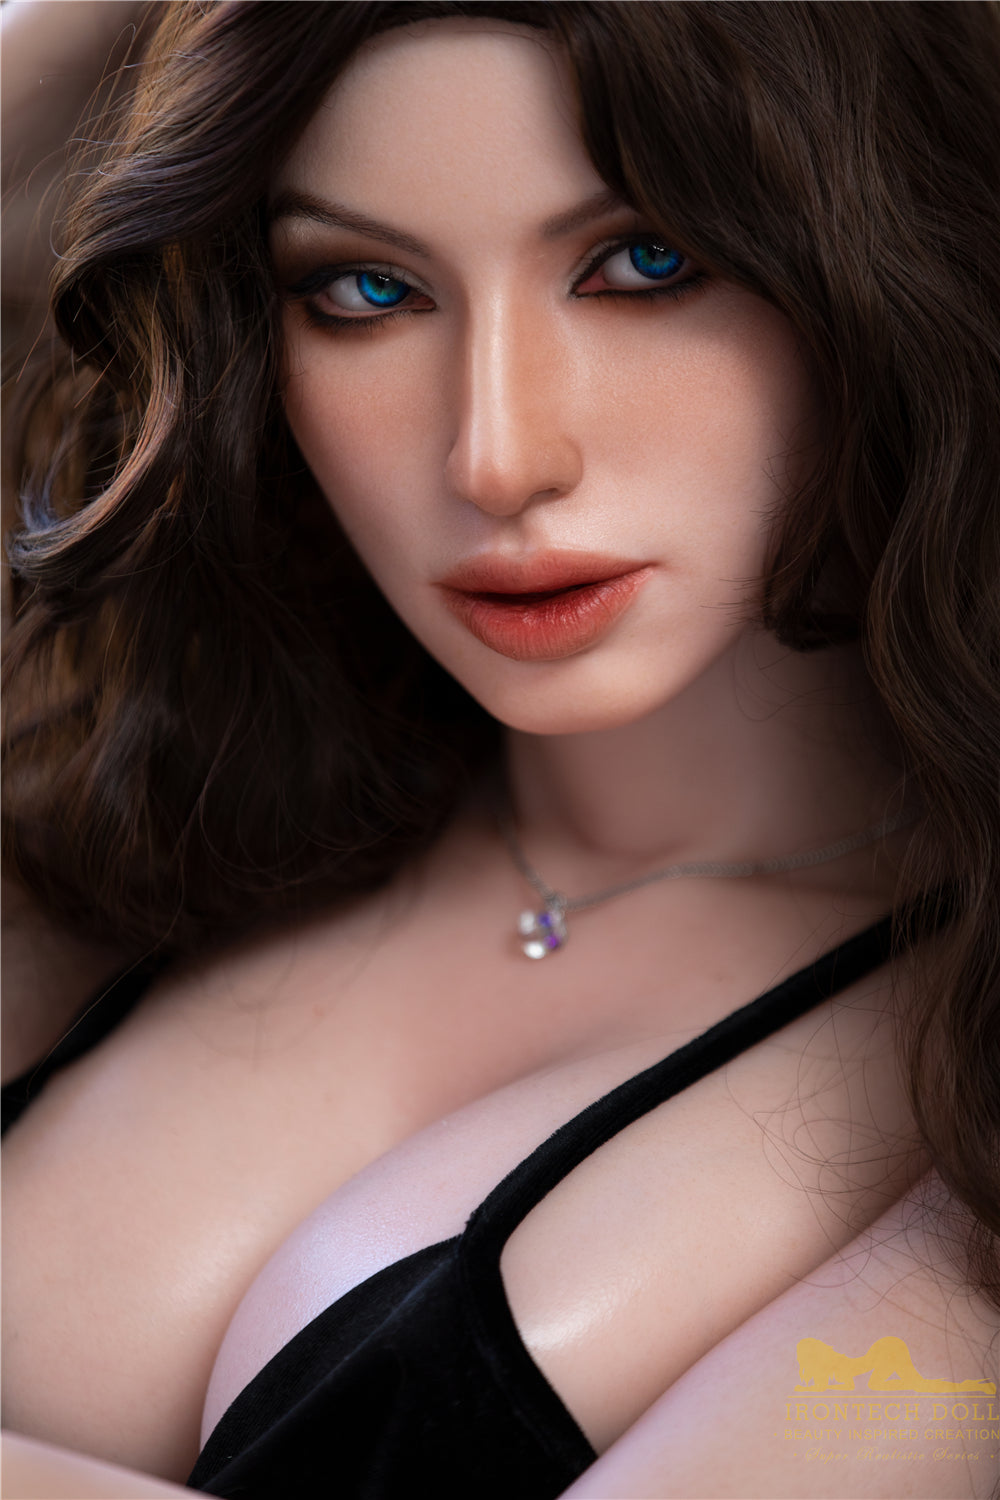 Irontech - Silicone Life size Sex Doll - 5ft 5in (166cm) - Ruby - Love Dolls 4U